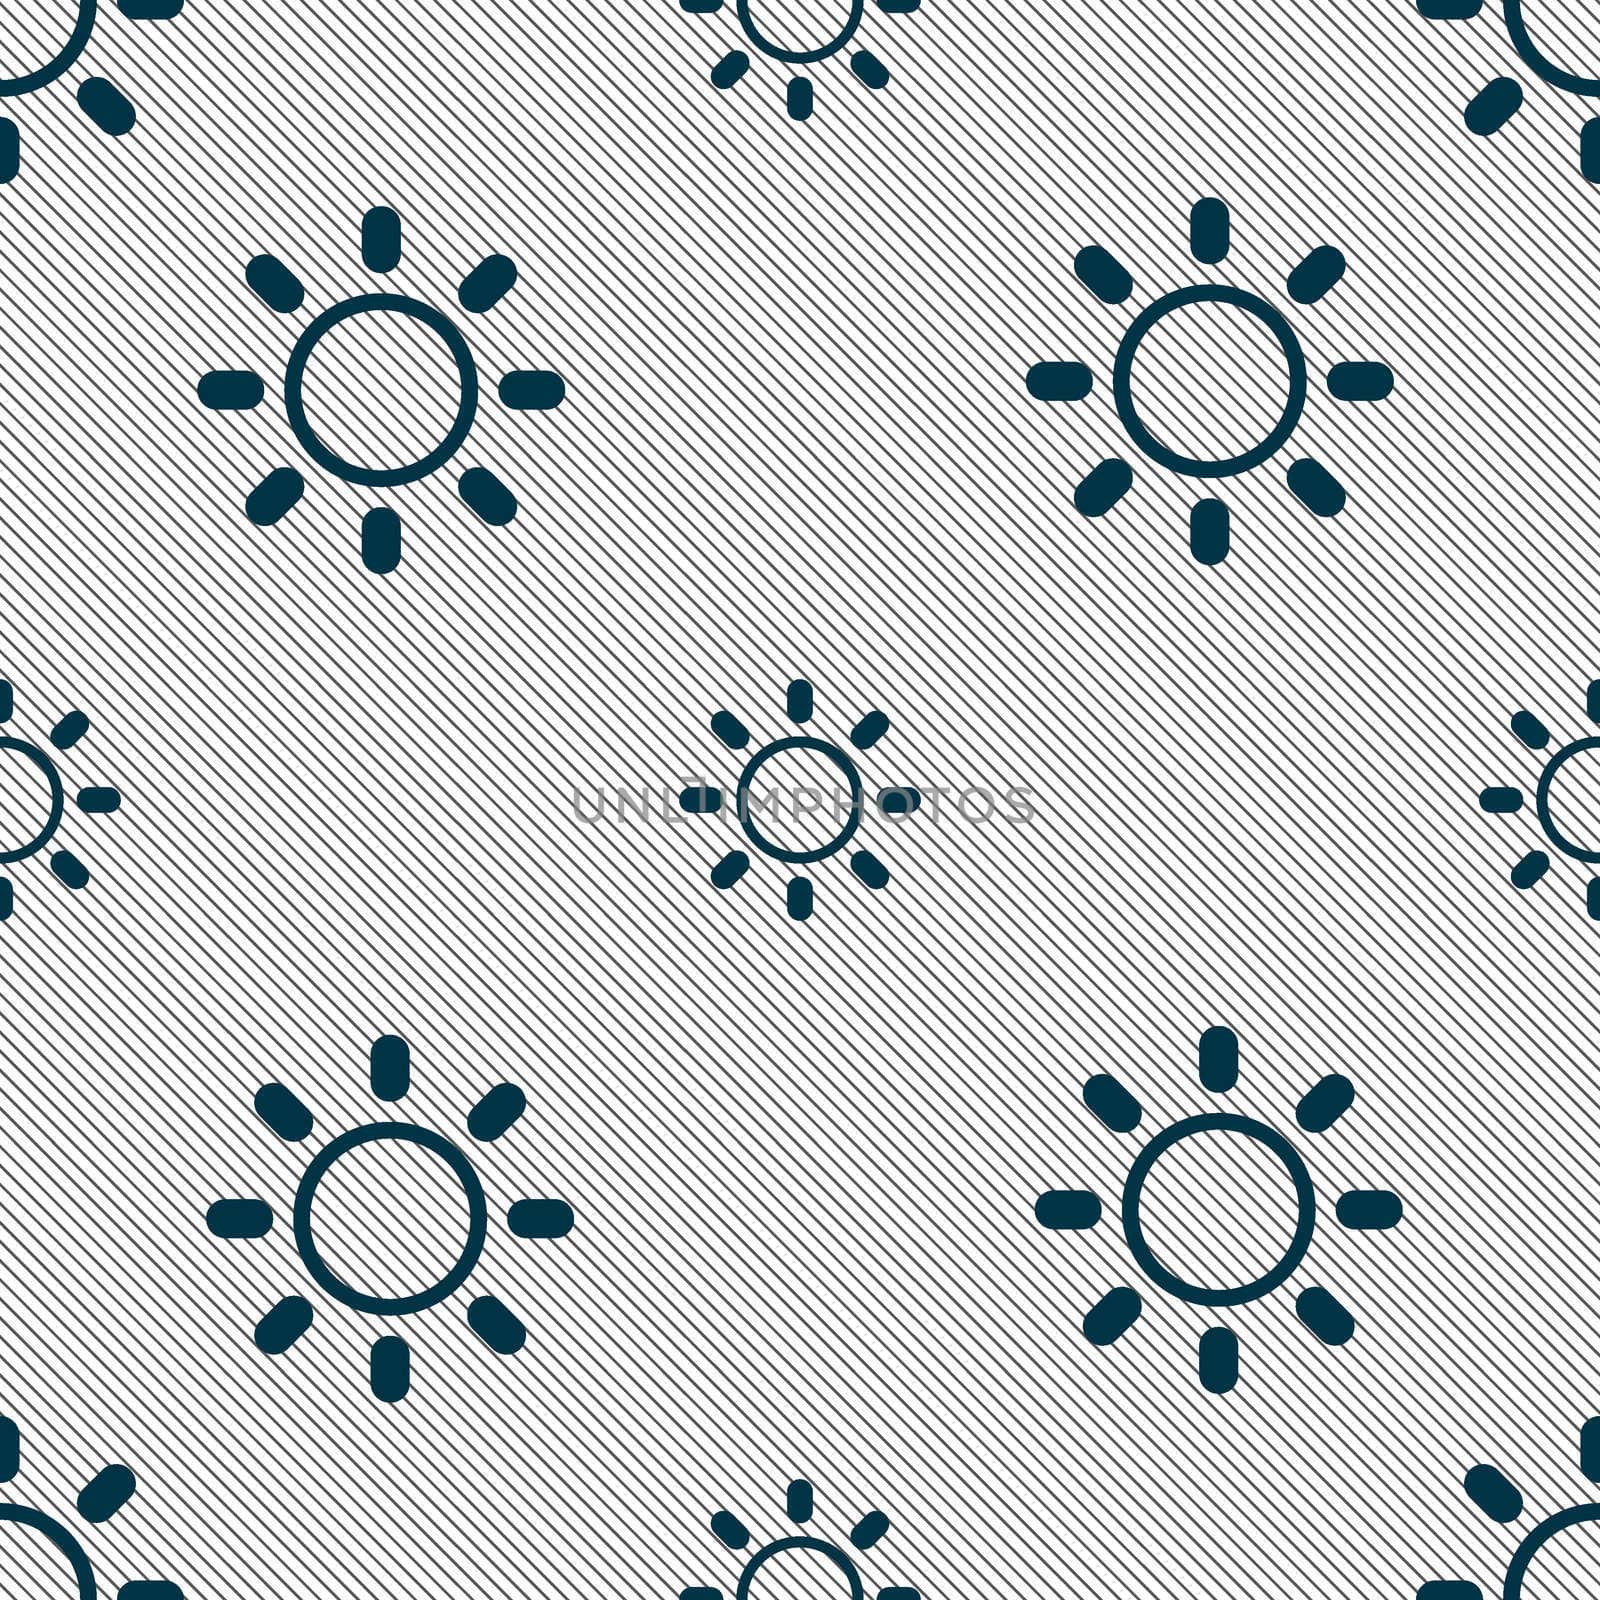 Brightness icon sign. Seamless pattern with geometric texture. illustration